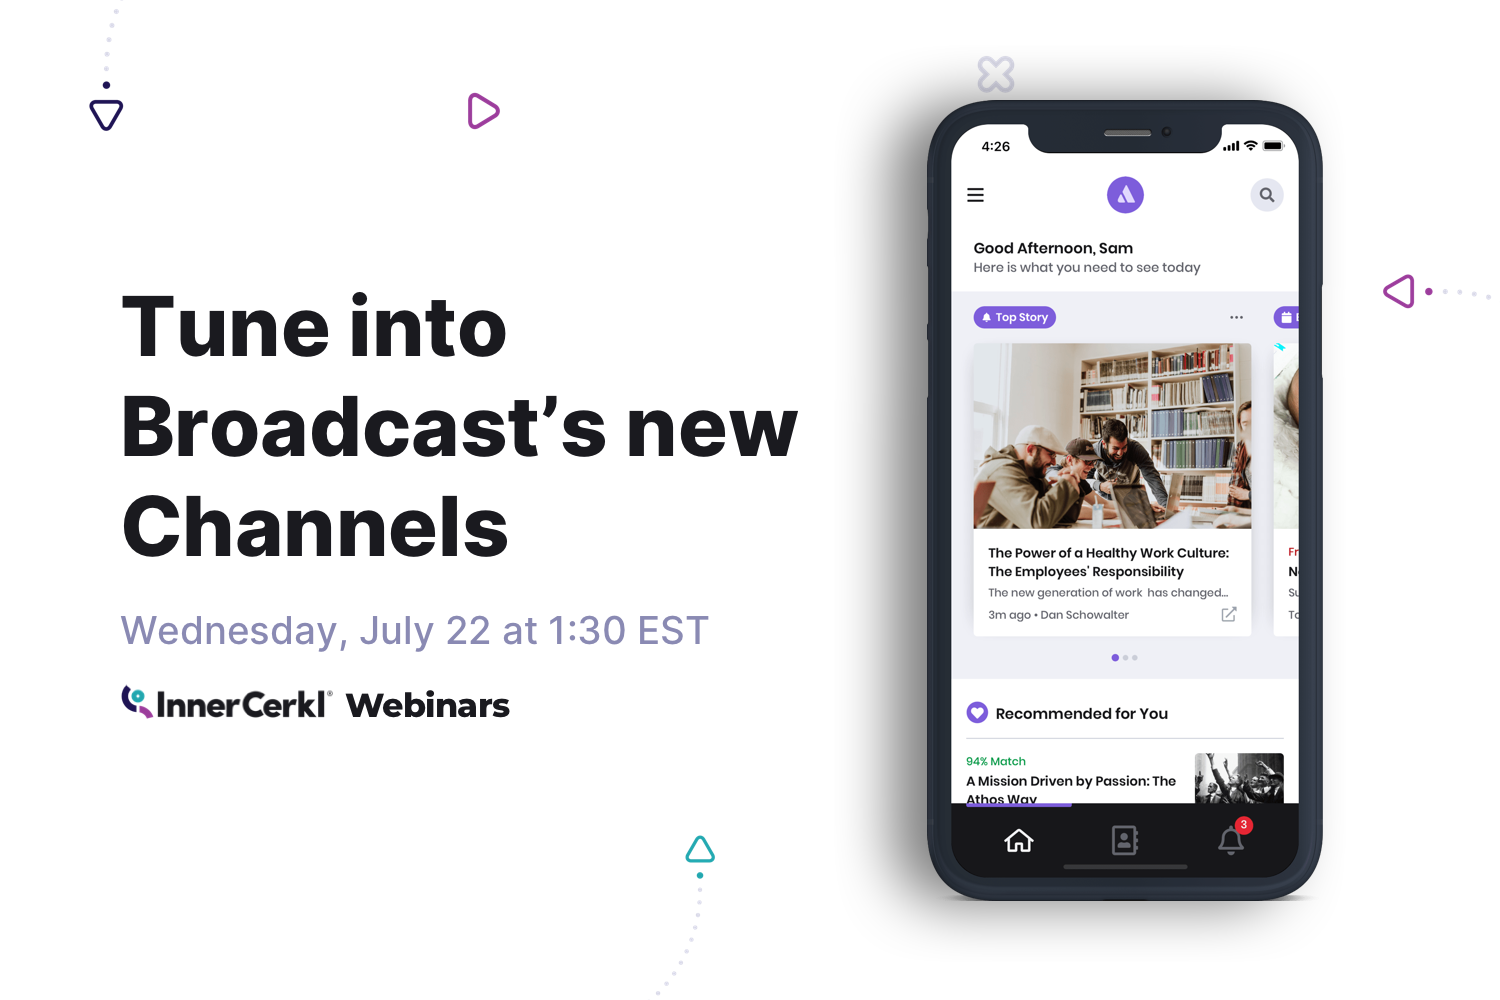 Tune into Broadcast’s new Channels